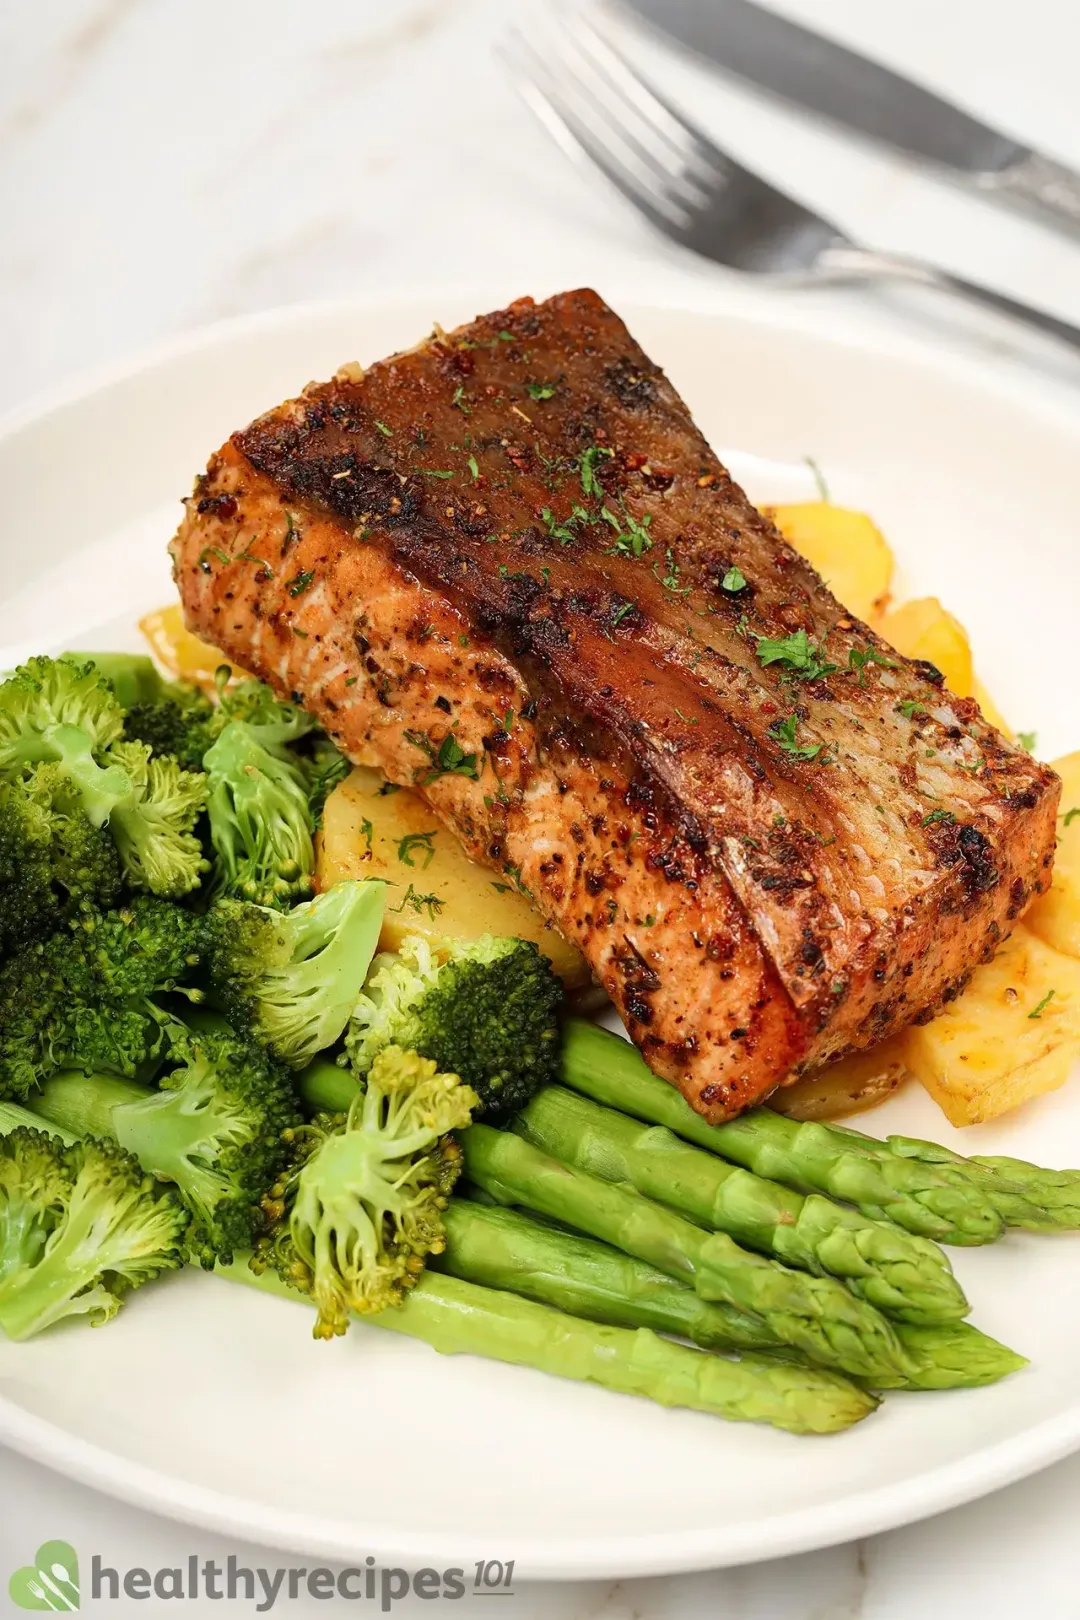 A plate of air fryer salmon, potato, broccoli florets, and asparagus laid near a silver spoon and fork